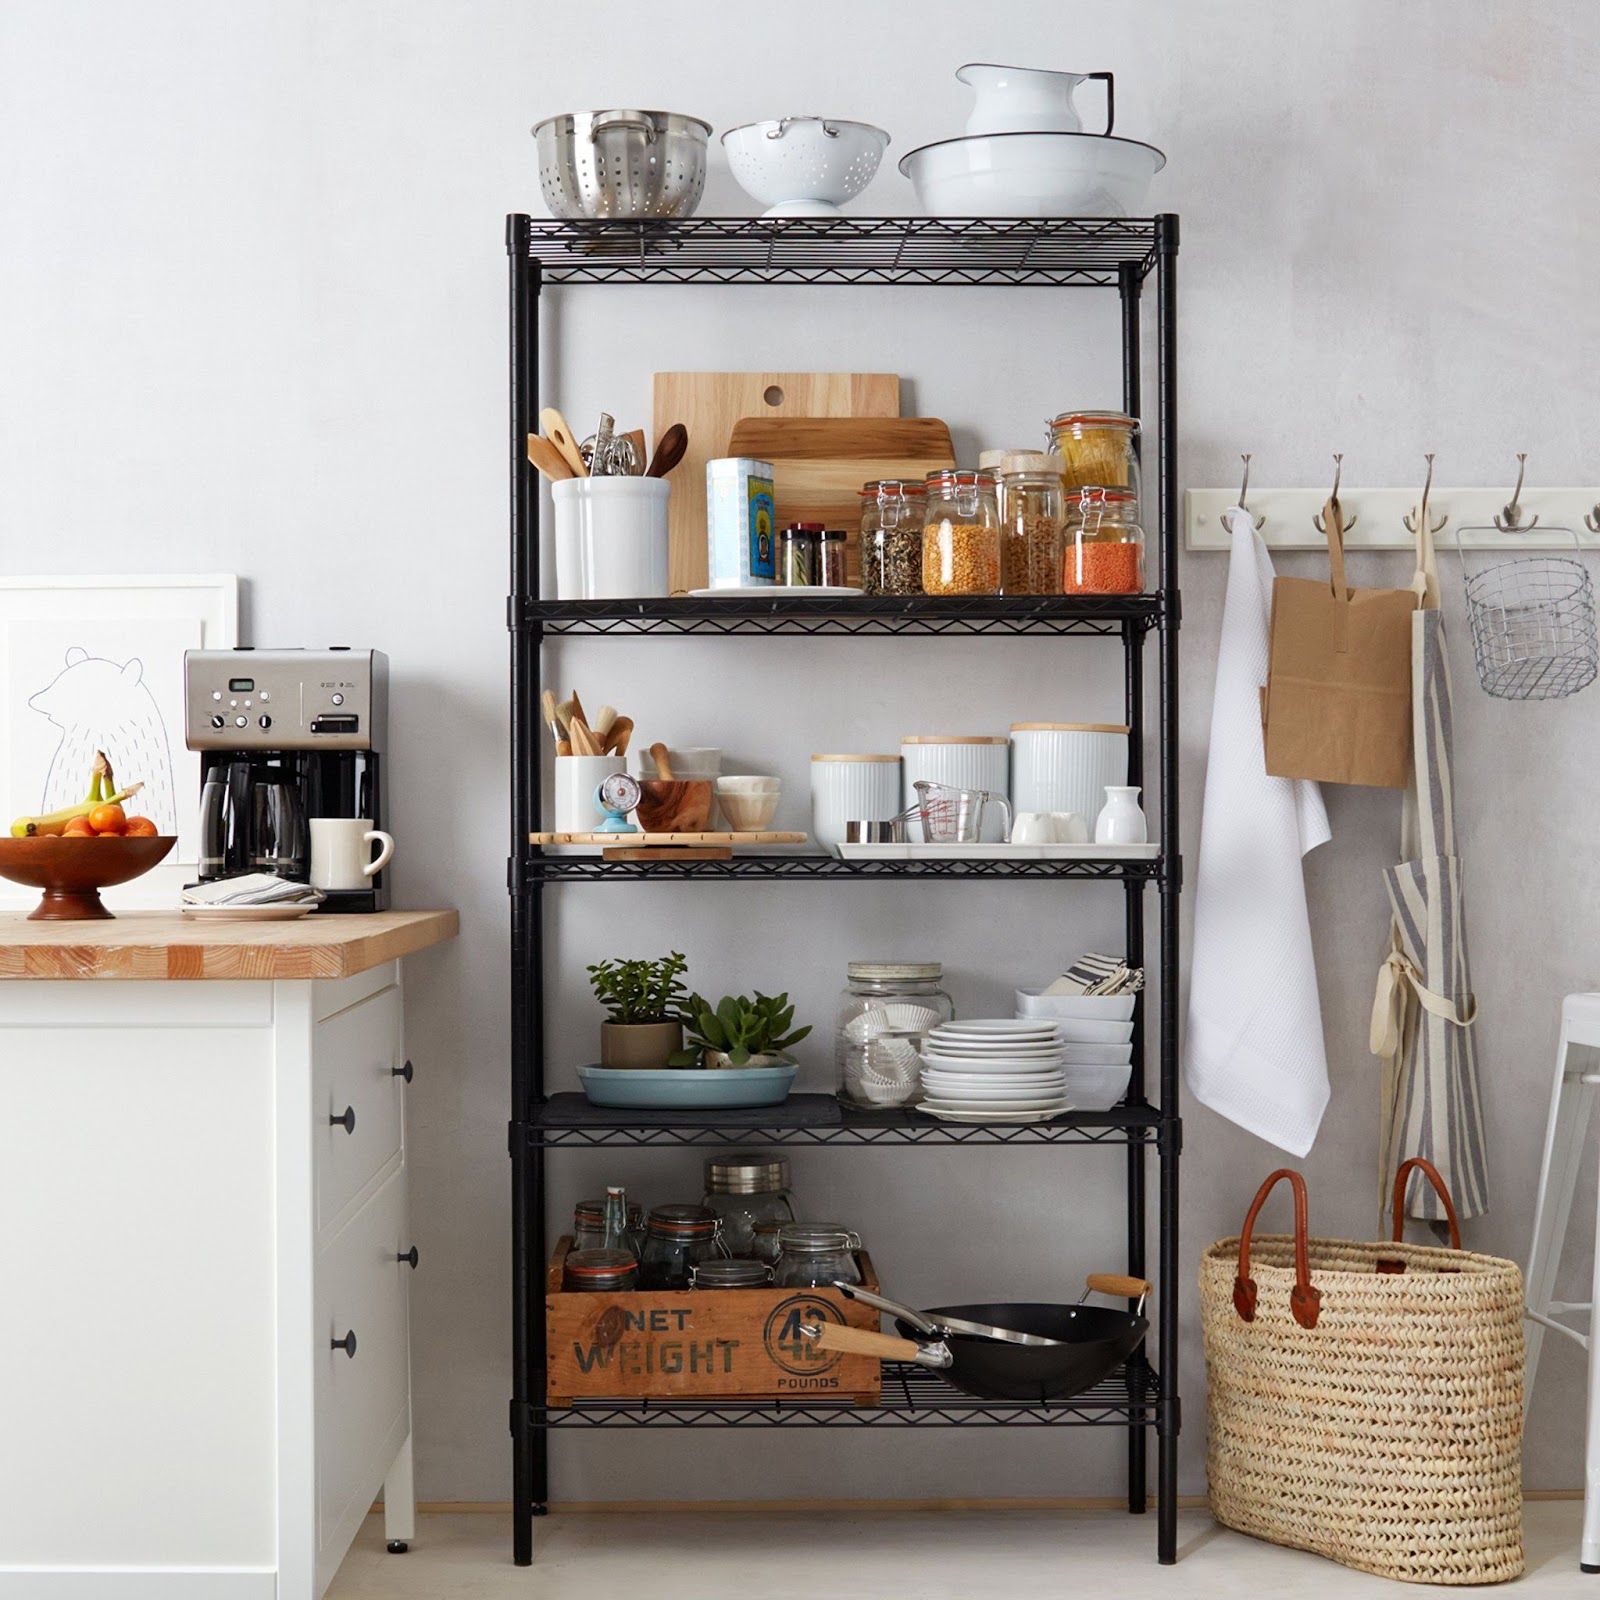 Storage can Make Your Kitchen More Beautiful in Kenya